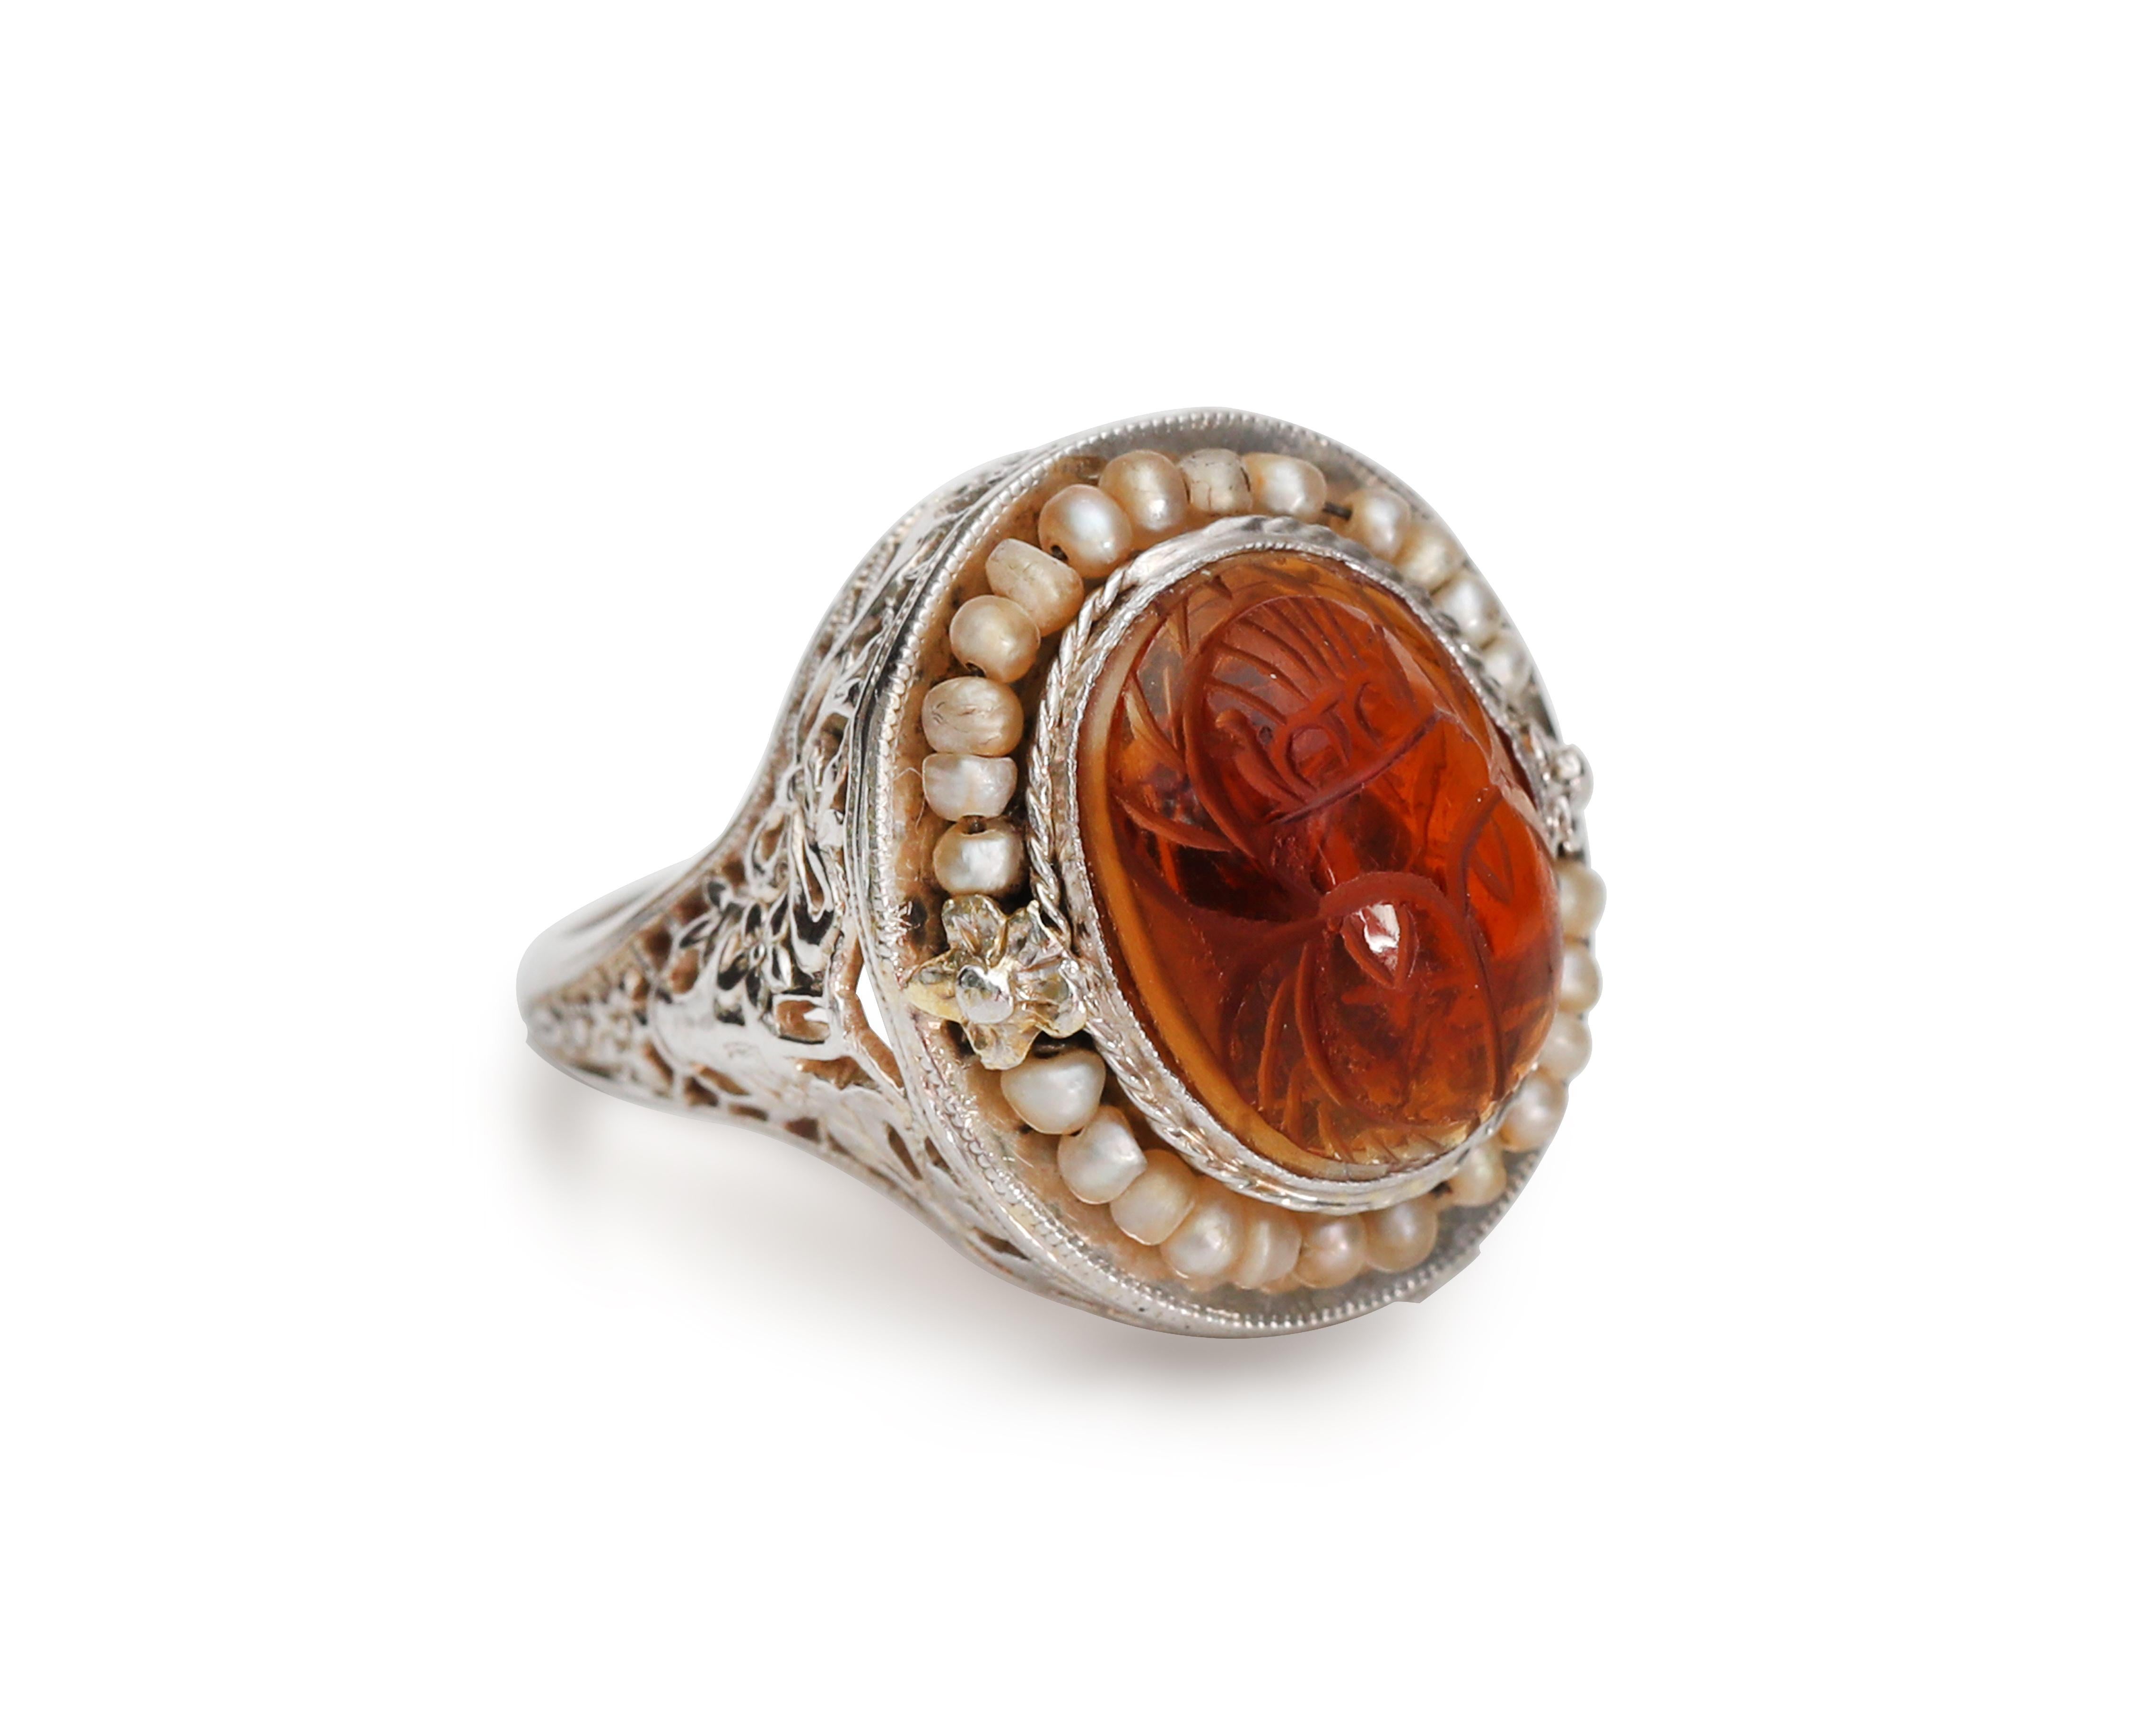 Late Victorian Victorian 14K White Gold Filigree Ring, Scarab Carved Carnelian Seed Pearl Halo